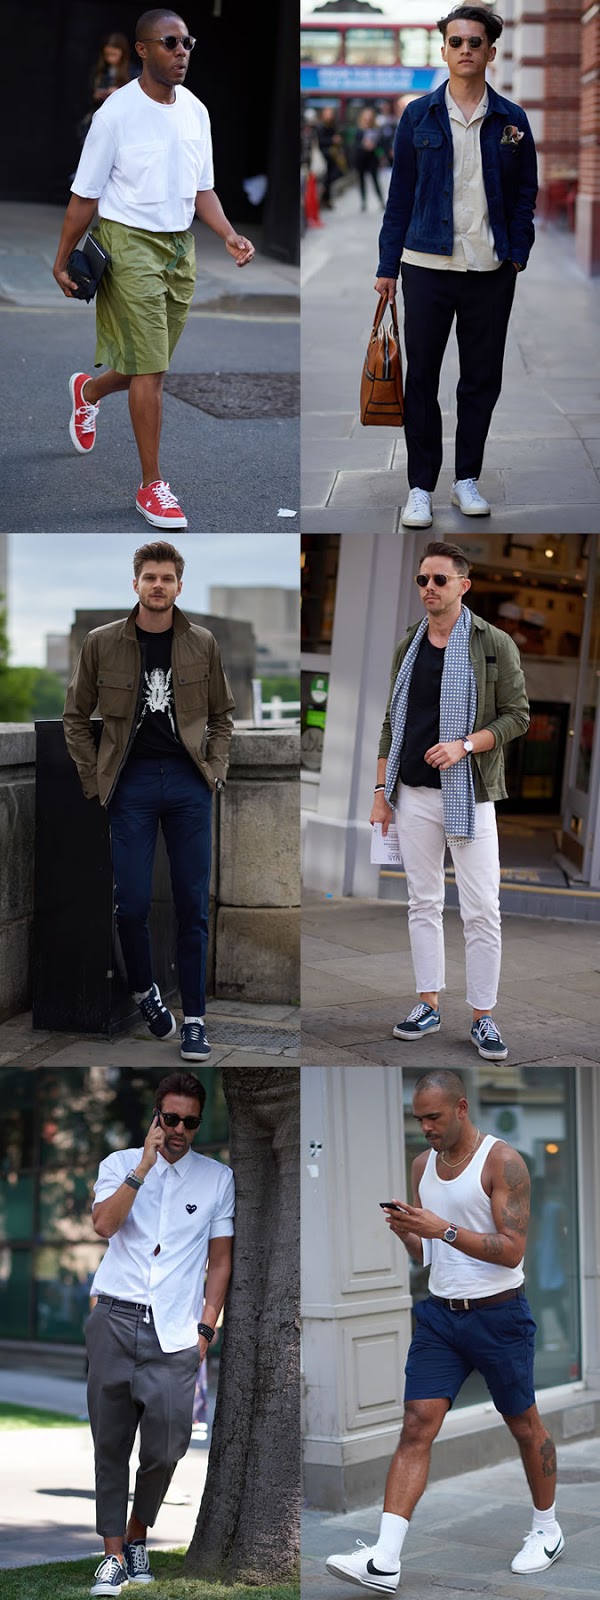 8 Major Street Style Trends From The Men's SS18 Fashion Weeks - SALEM ...